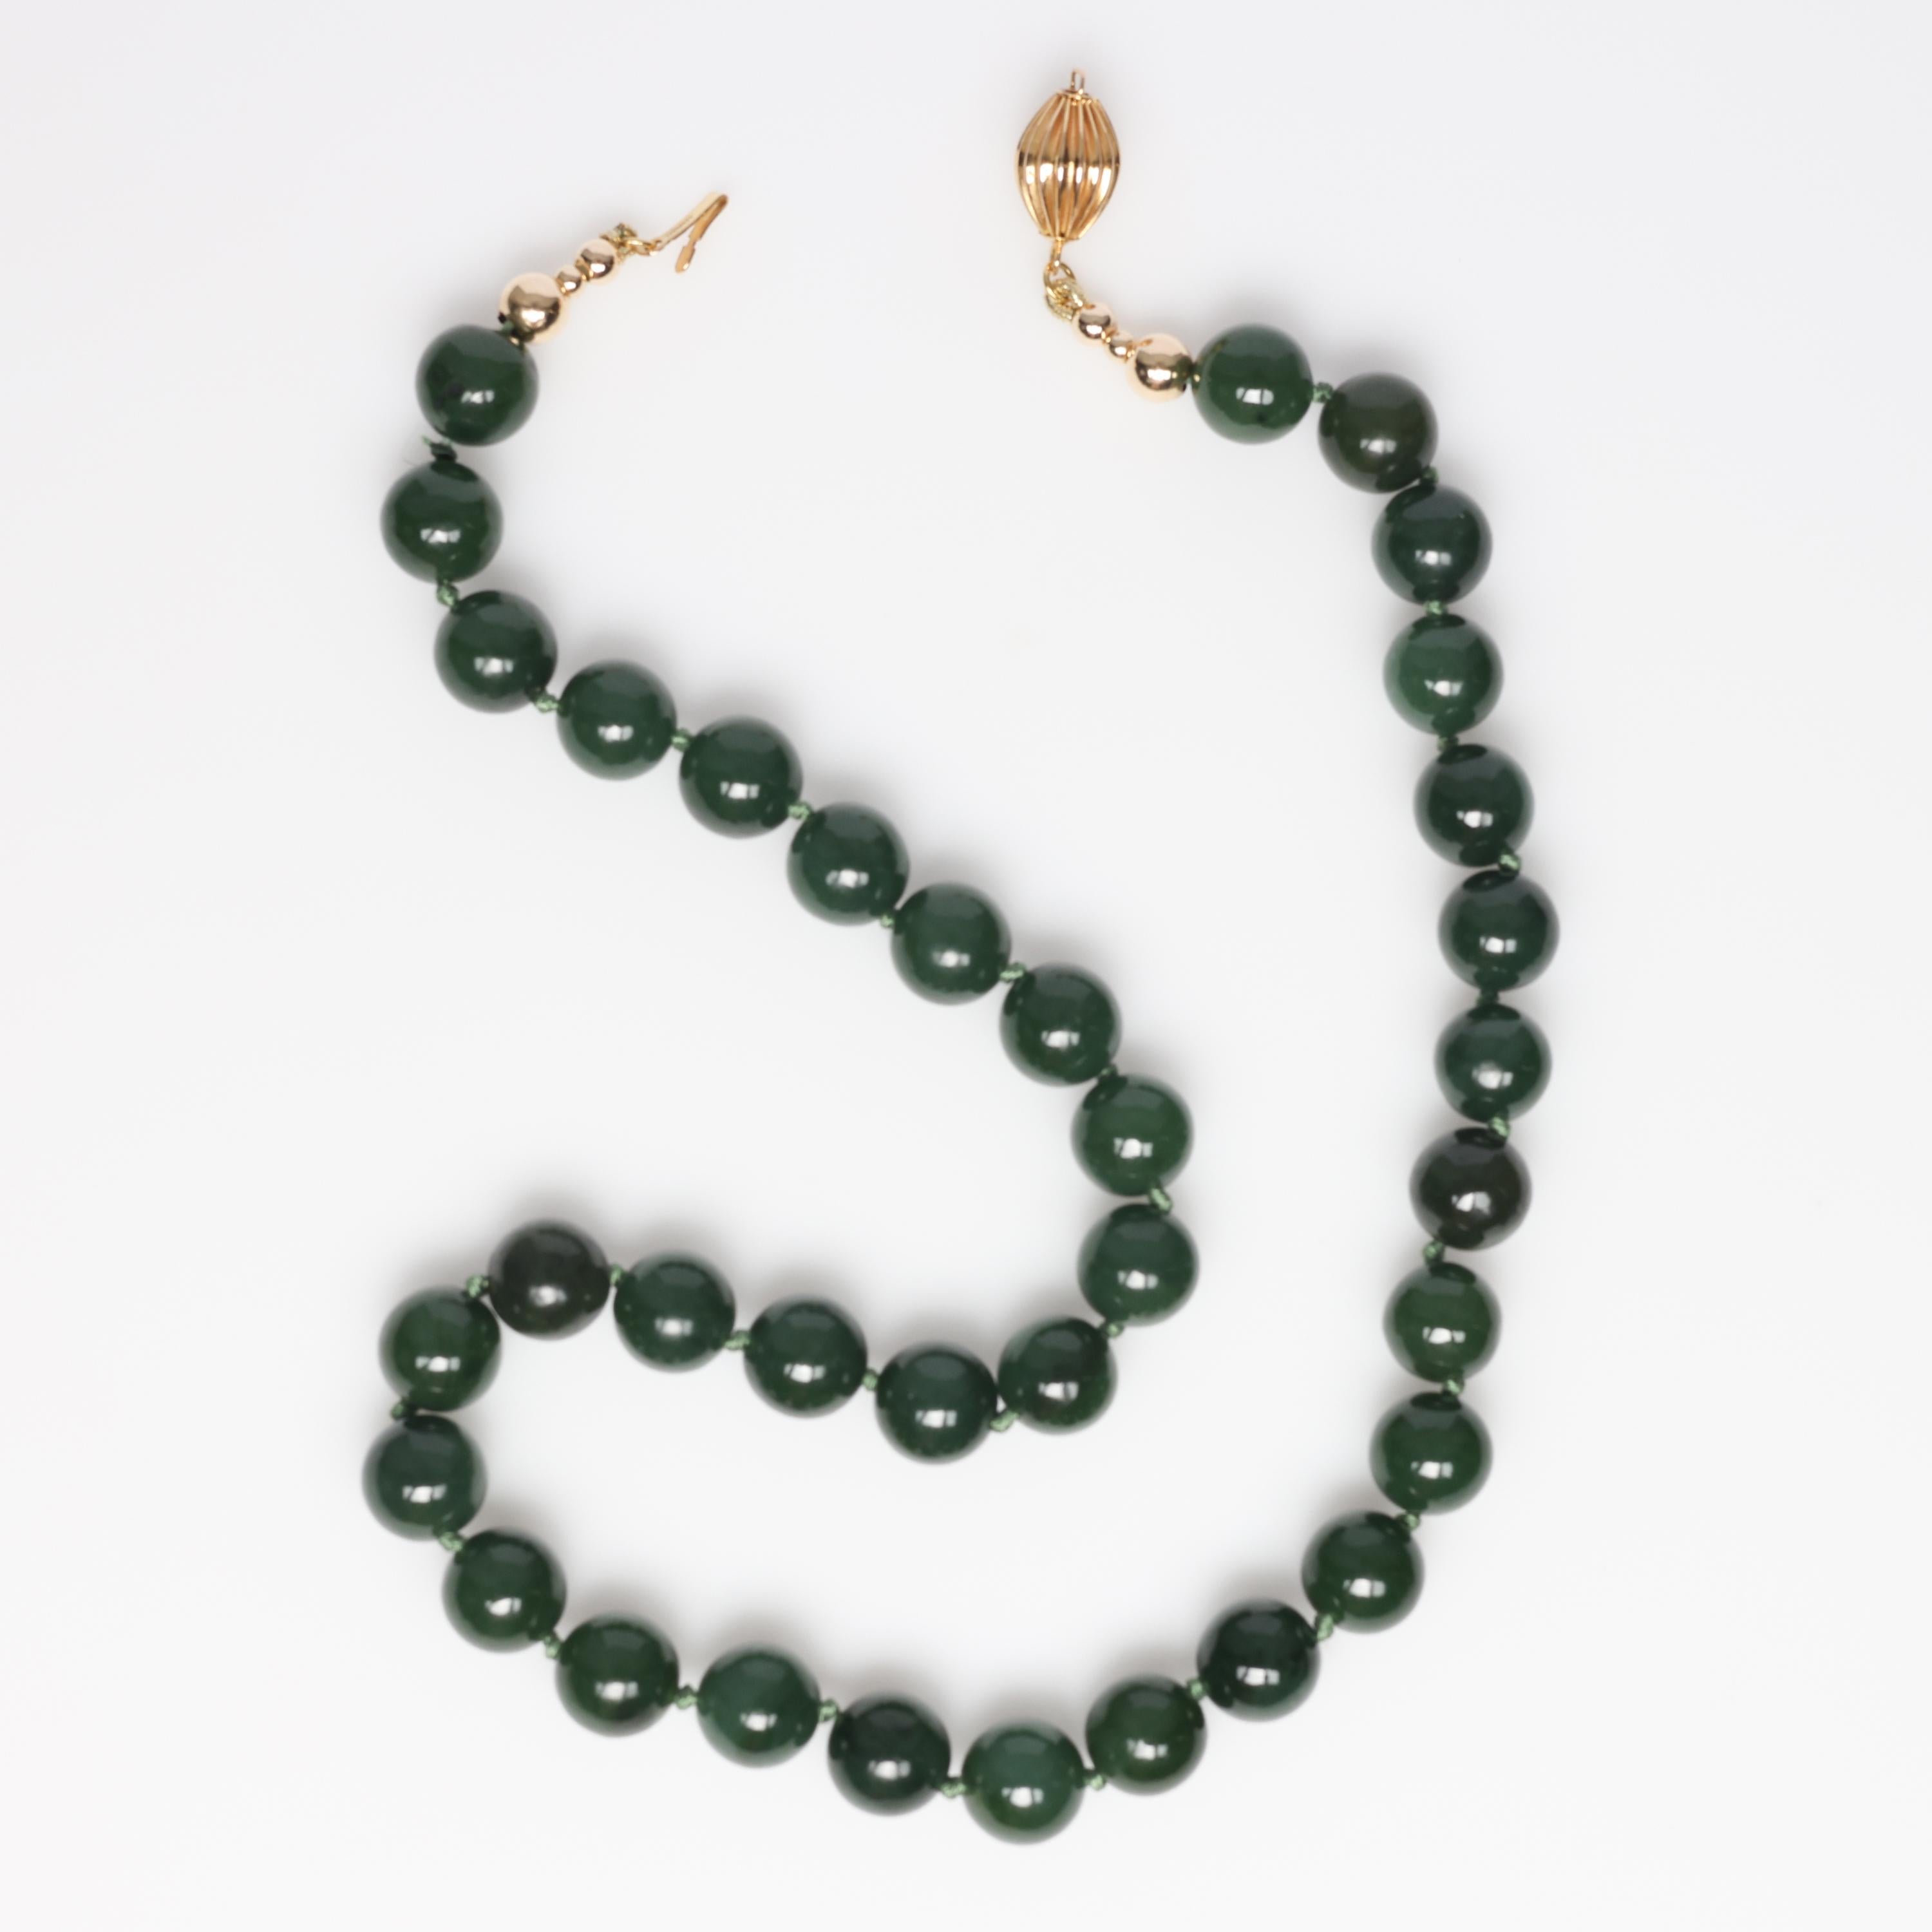 This timeless, classic natural and untreated nephrite jade necklace is 18